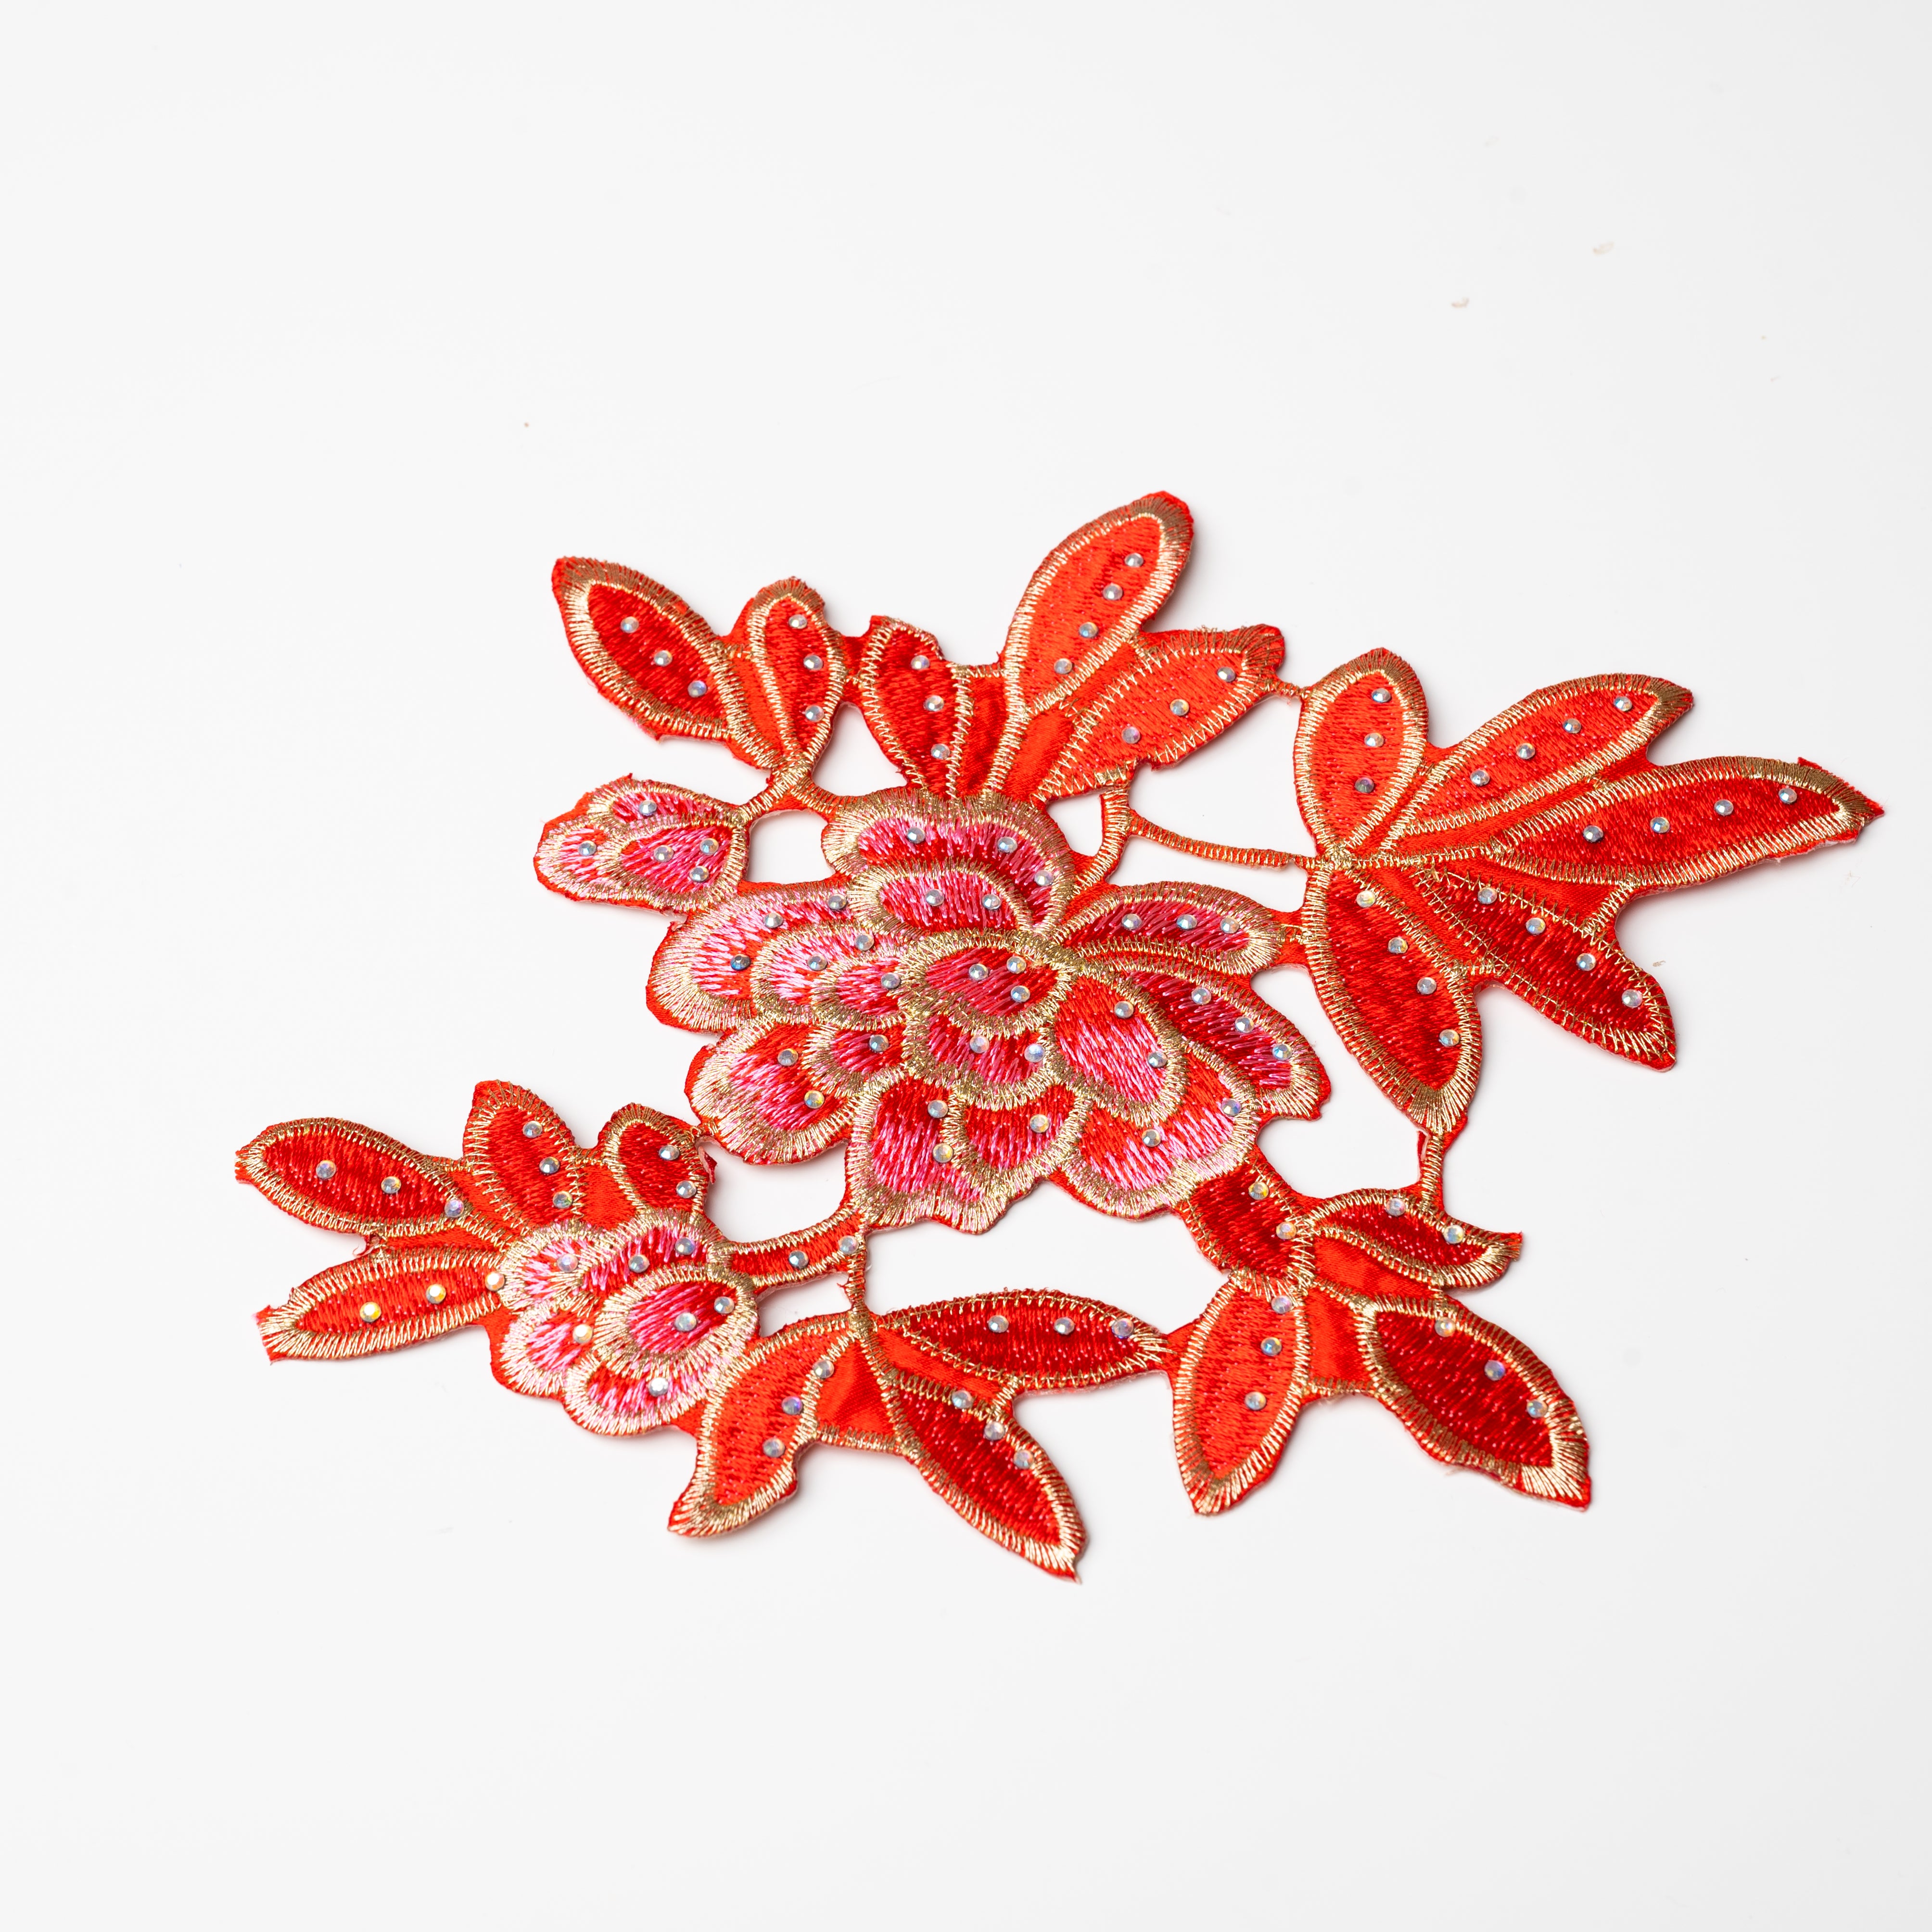 Heavily embroidered pink, red and gold floral applique scattered with hot fix AB crystals.  The petals and leaves are predominantly red and are outlined with gold thread.